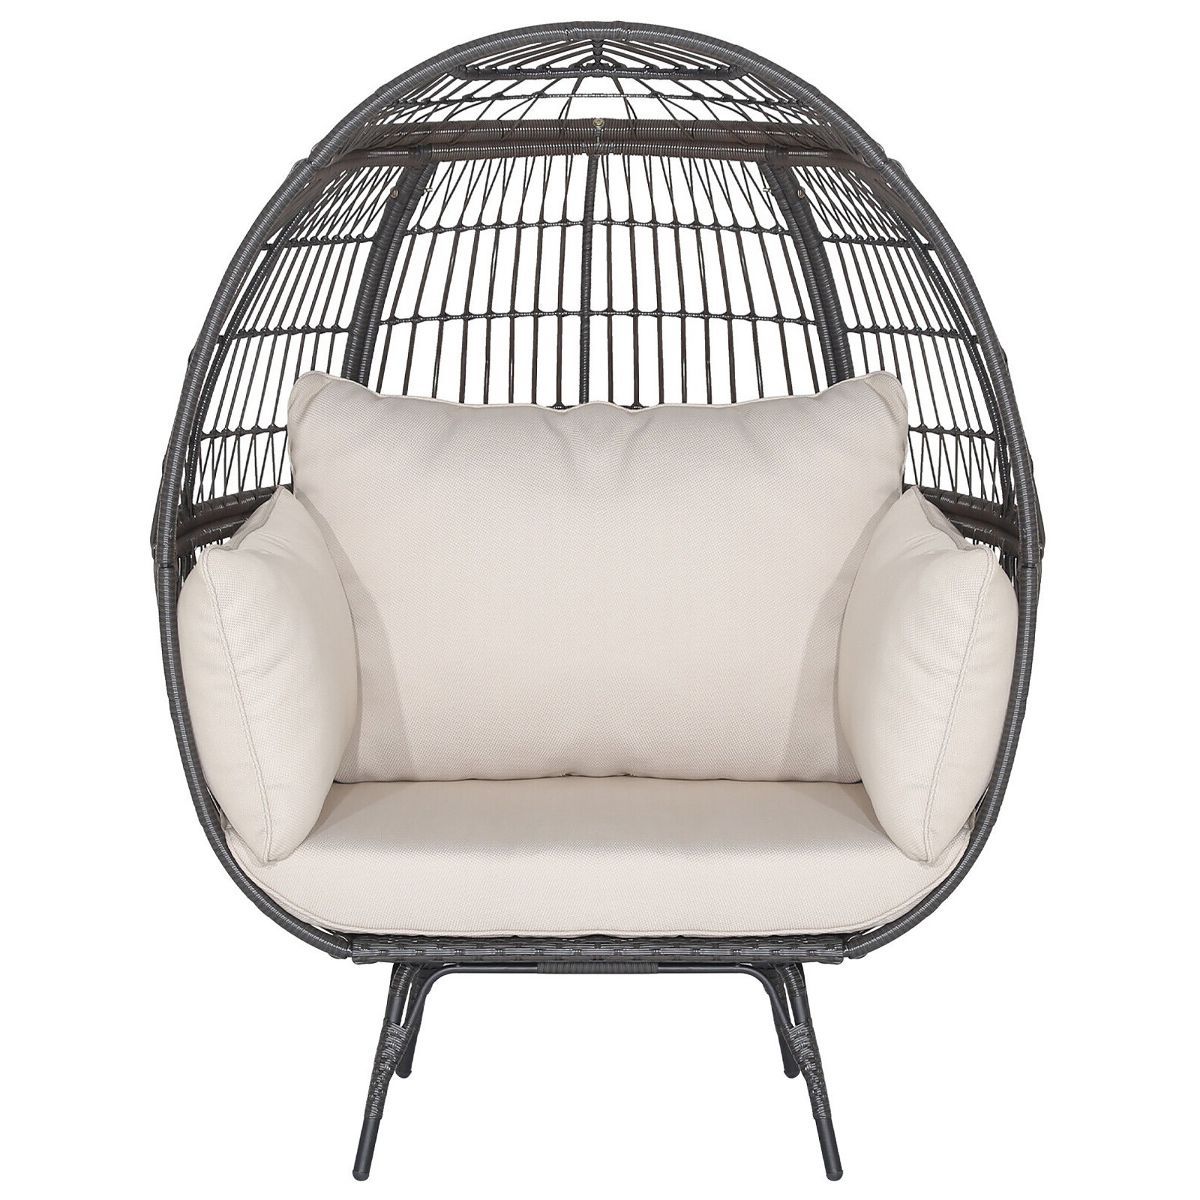 Tangkula Patio Rattan Wicker Lounge Chair Oversized Outdoor Metal Frame Egg Chair w/ 4 Cushions | Target